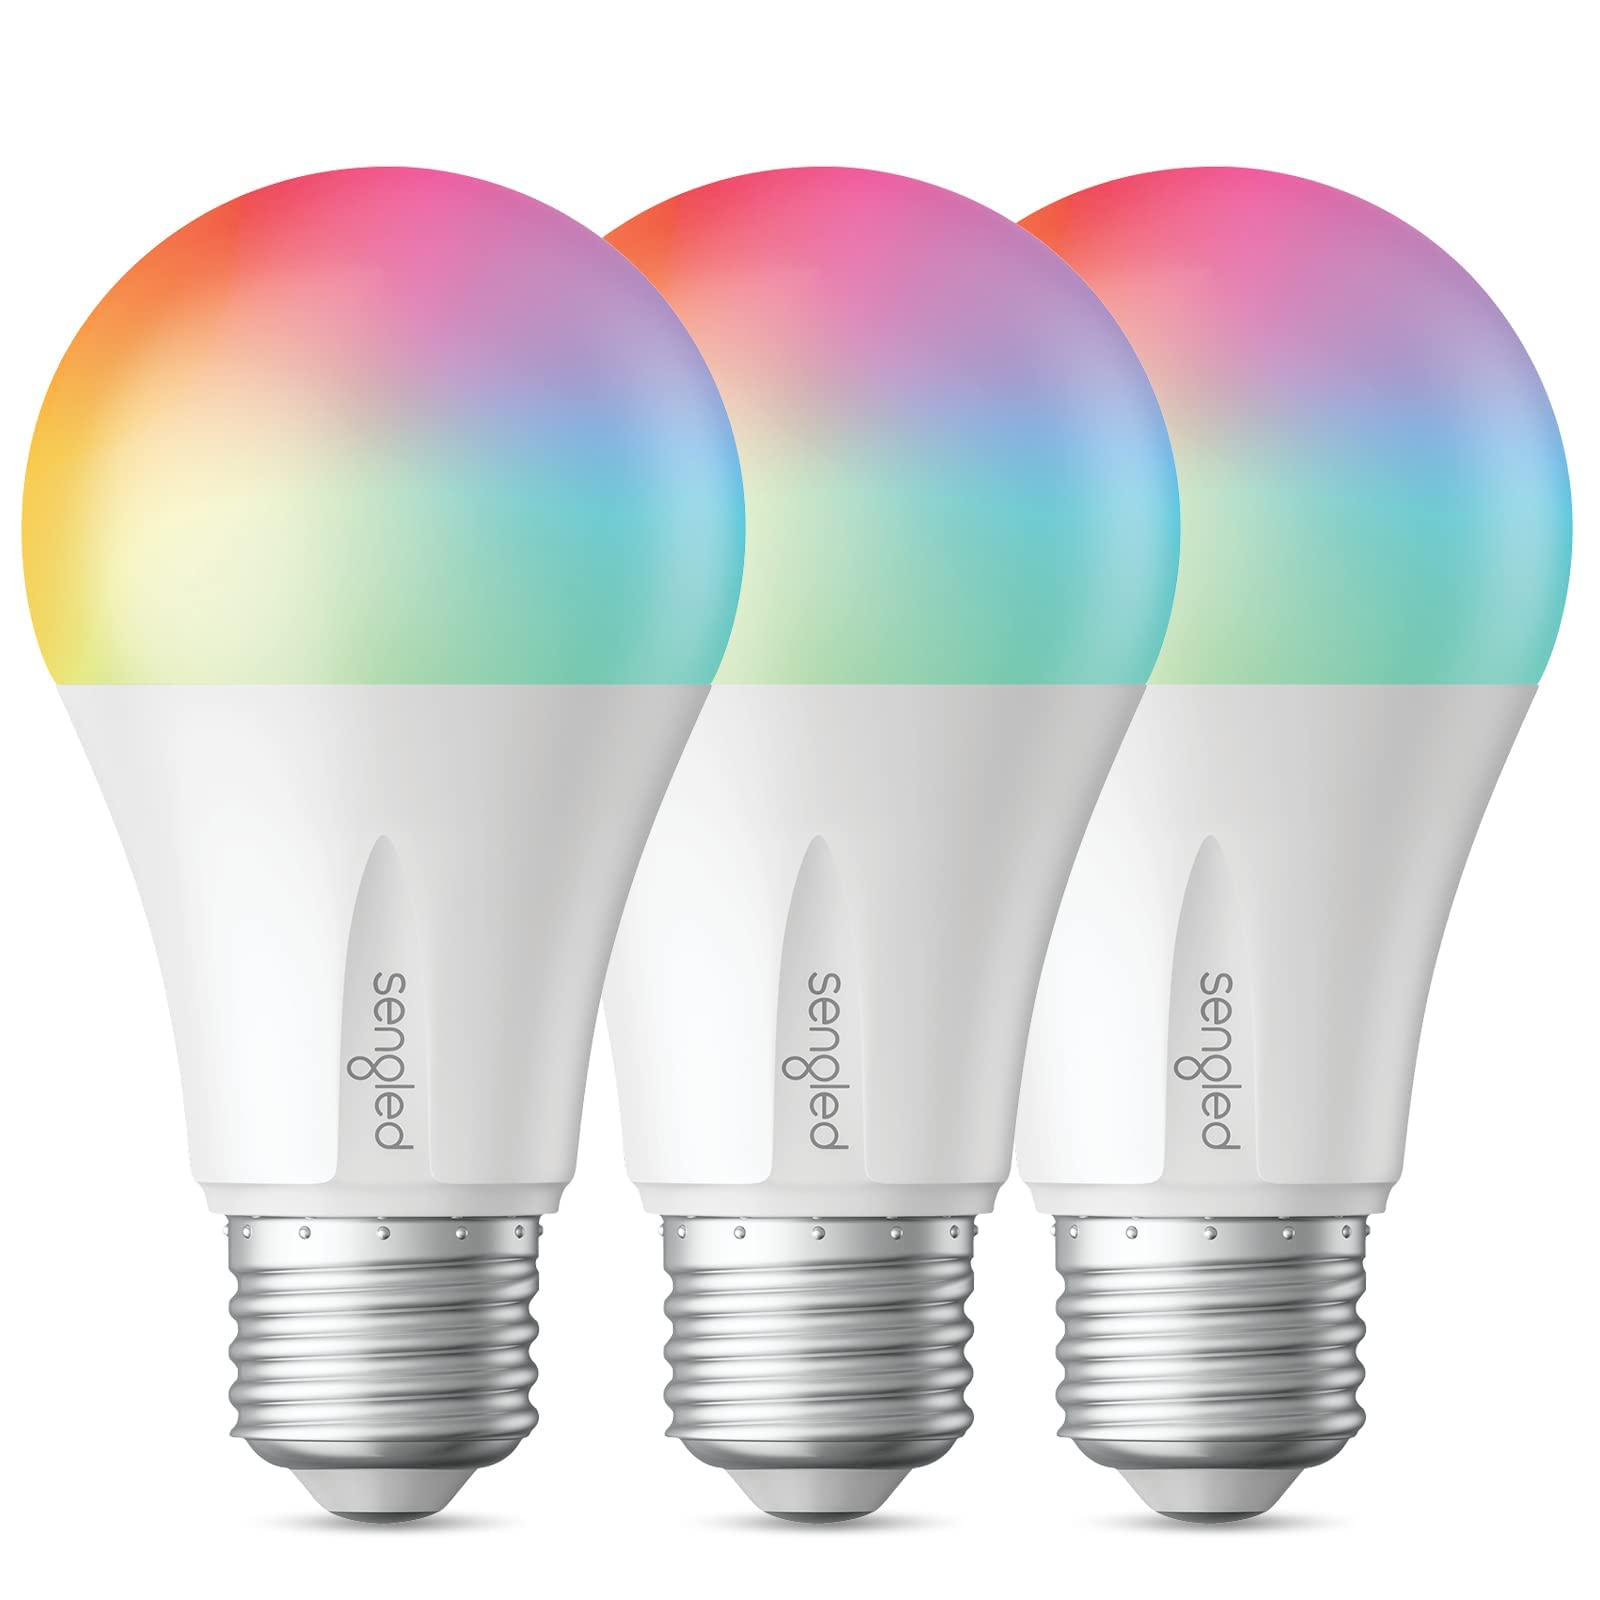 Sengled Zigbee Smart Light Bulbs, Smart Hub Required, Works With Smartthings And Echo With Built-In Hub, Voice Control With Alex